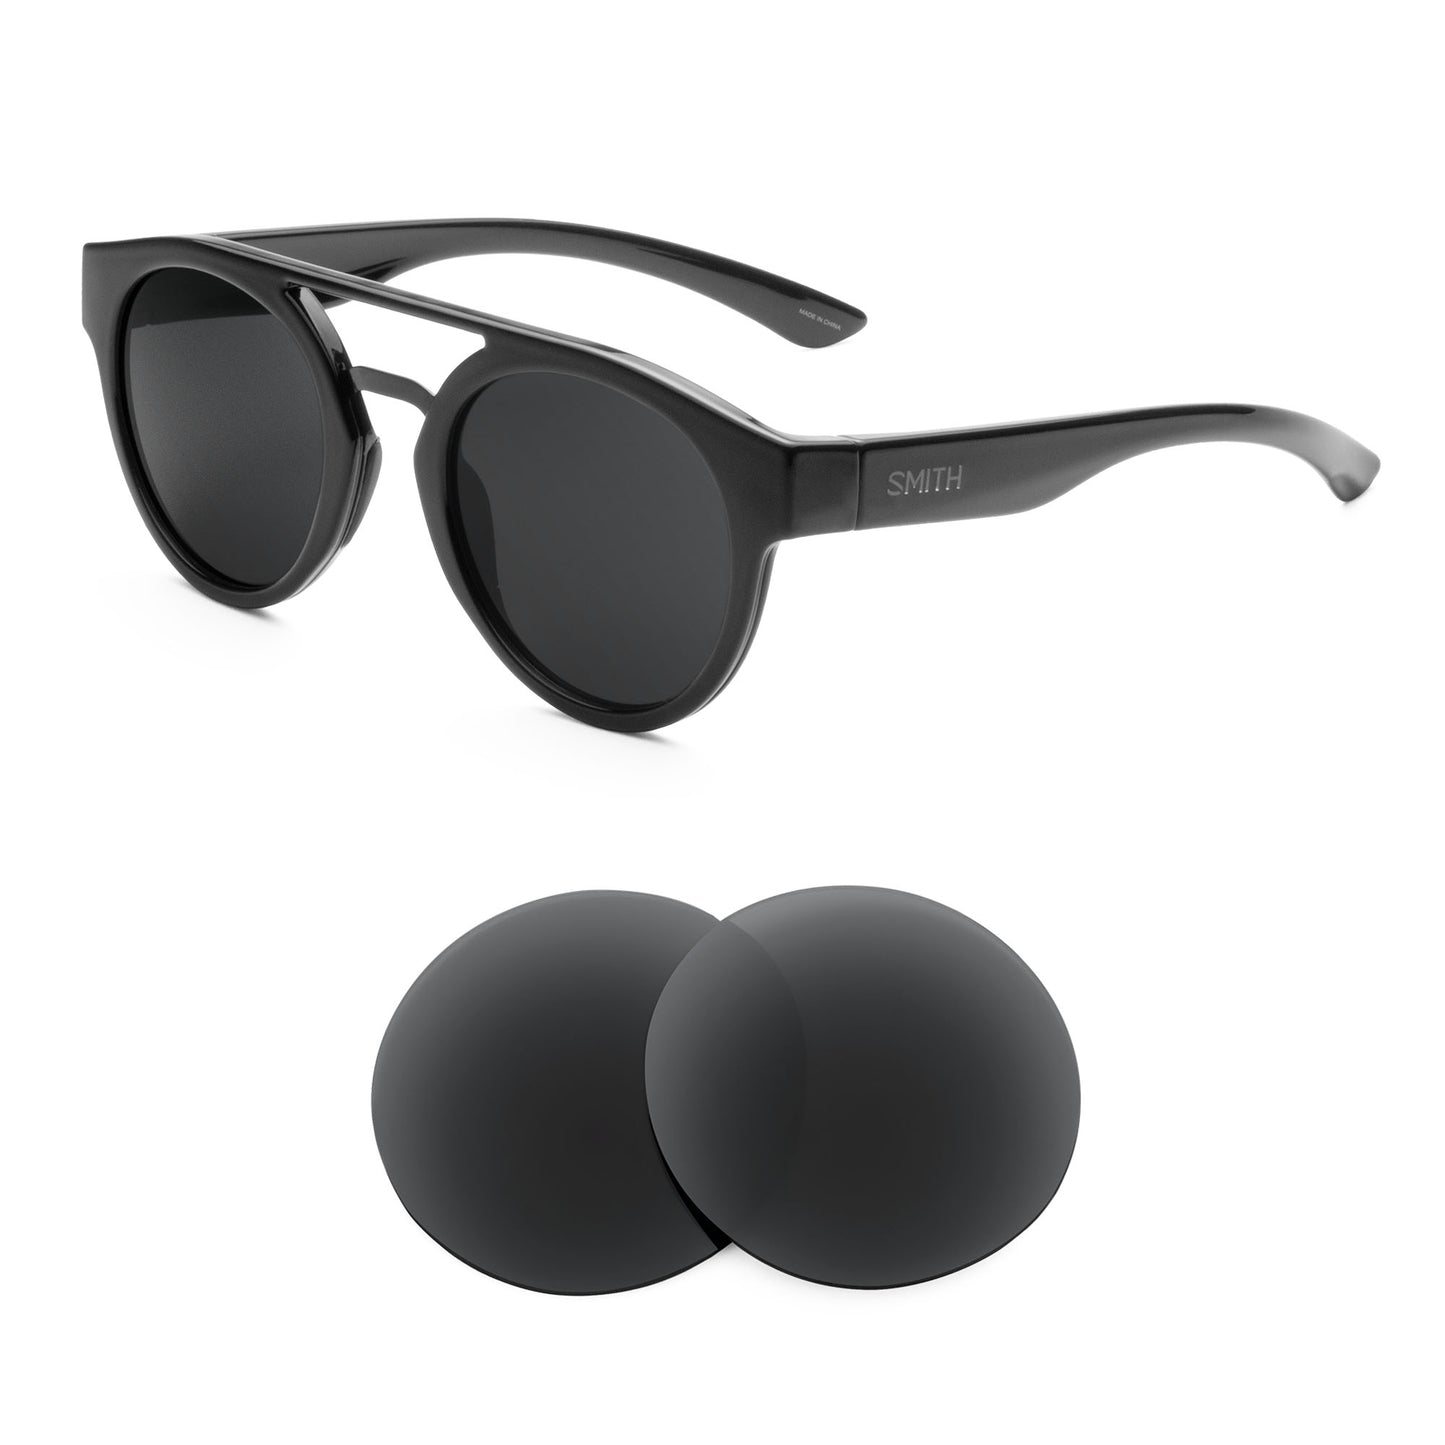 Smith Range sunglasses with replacement lenses